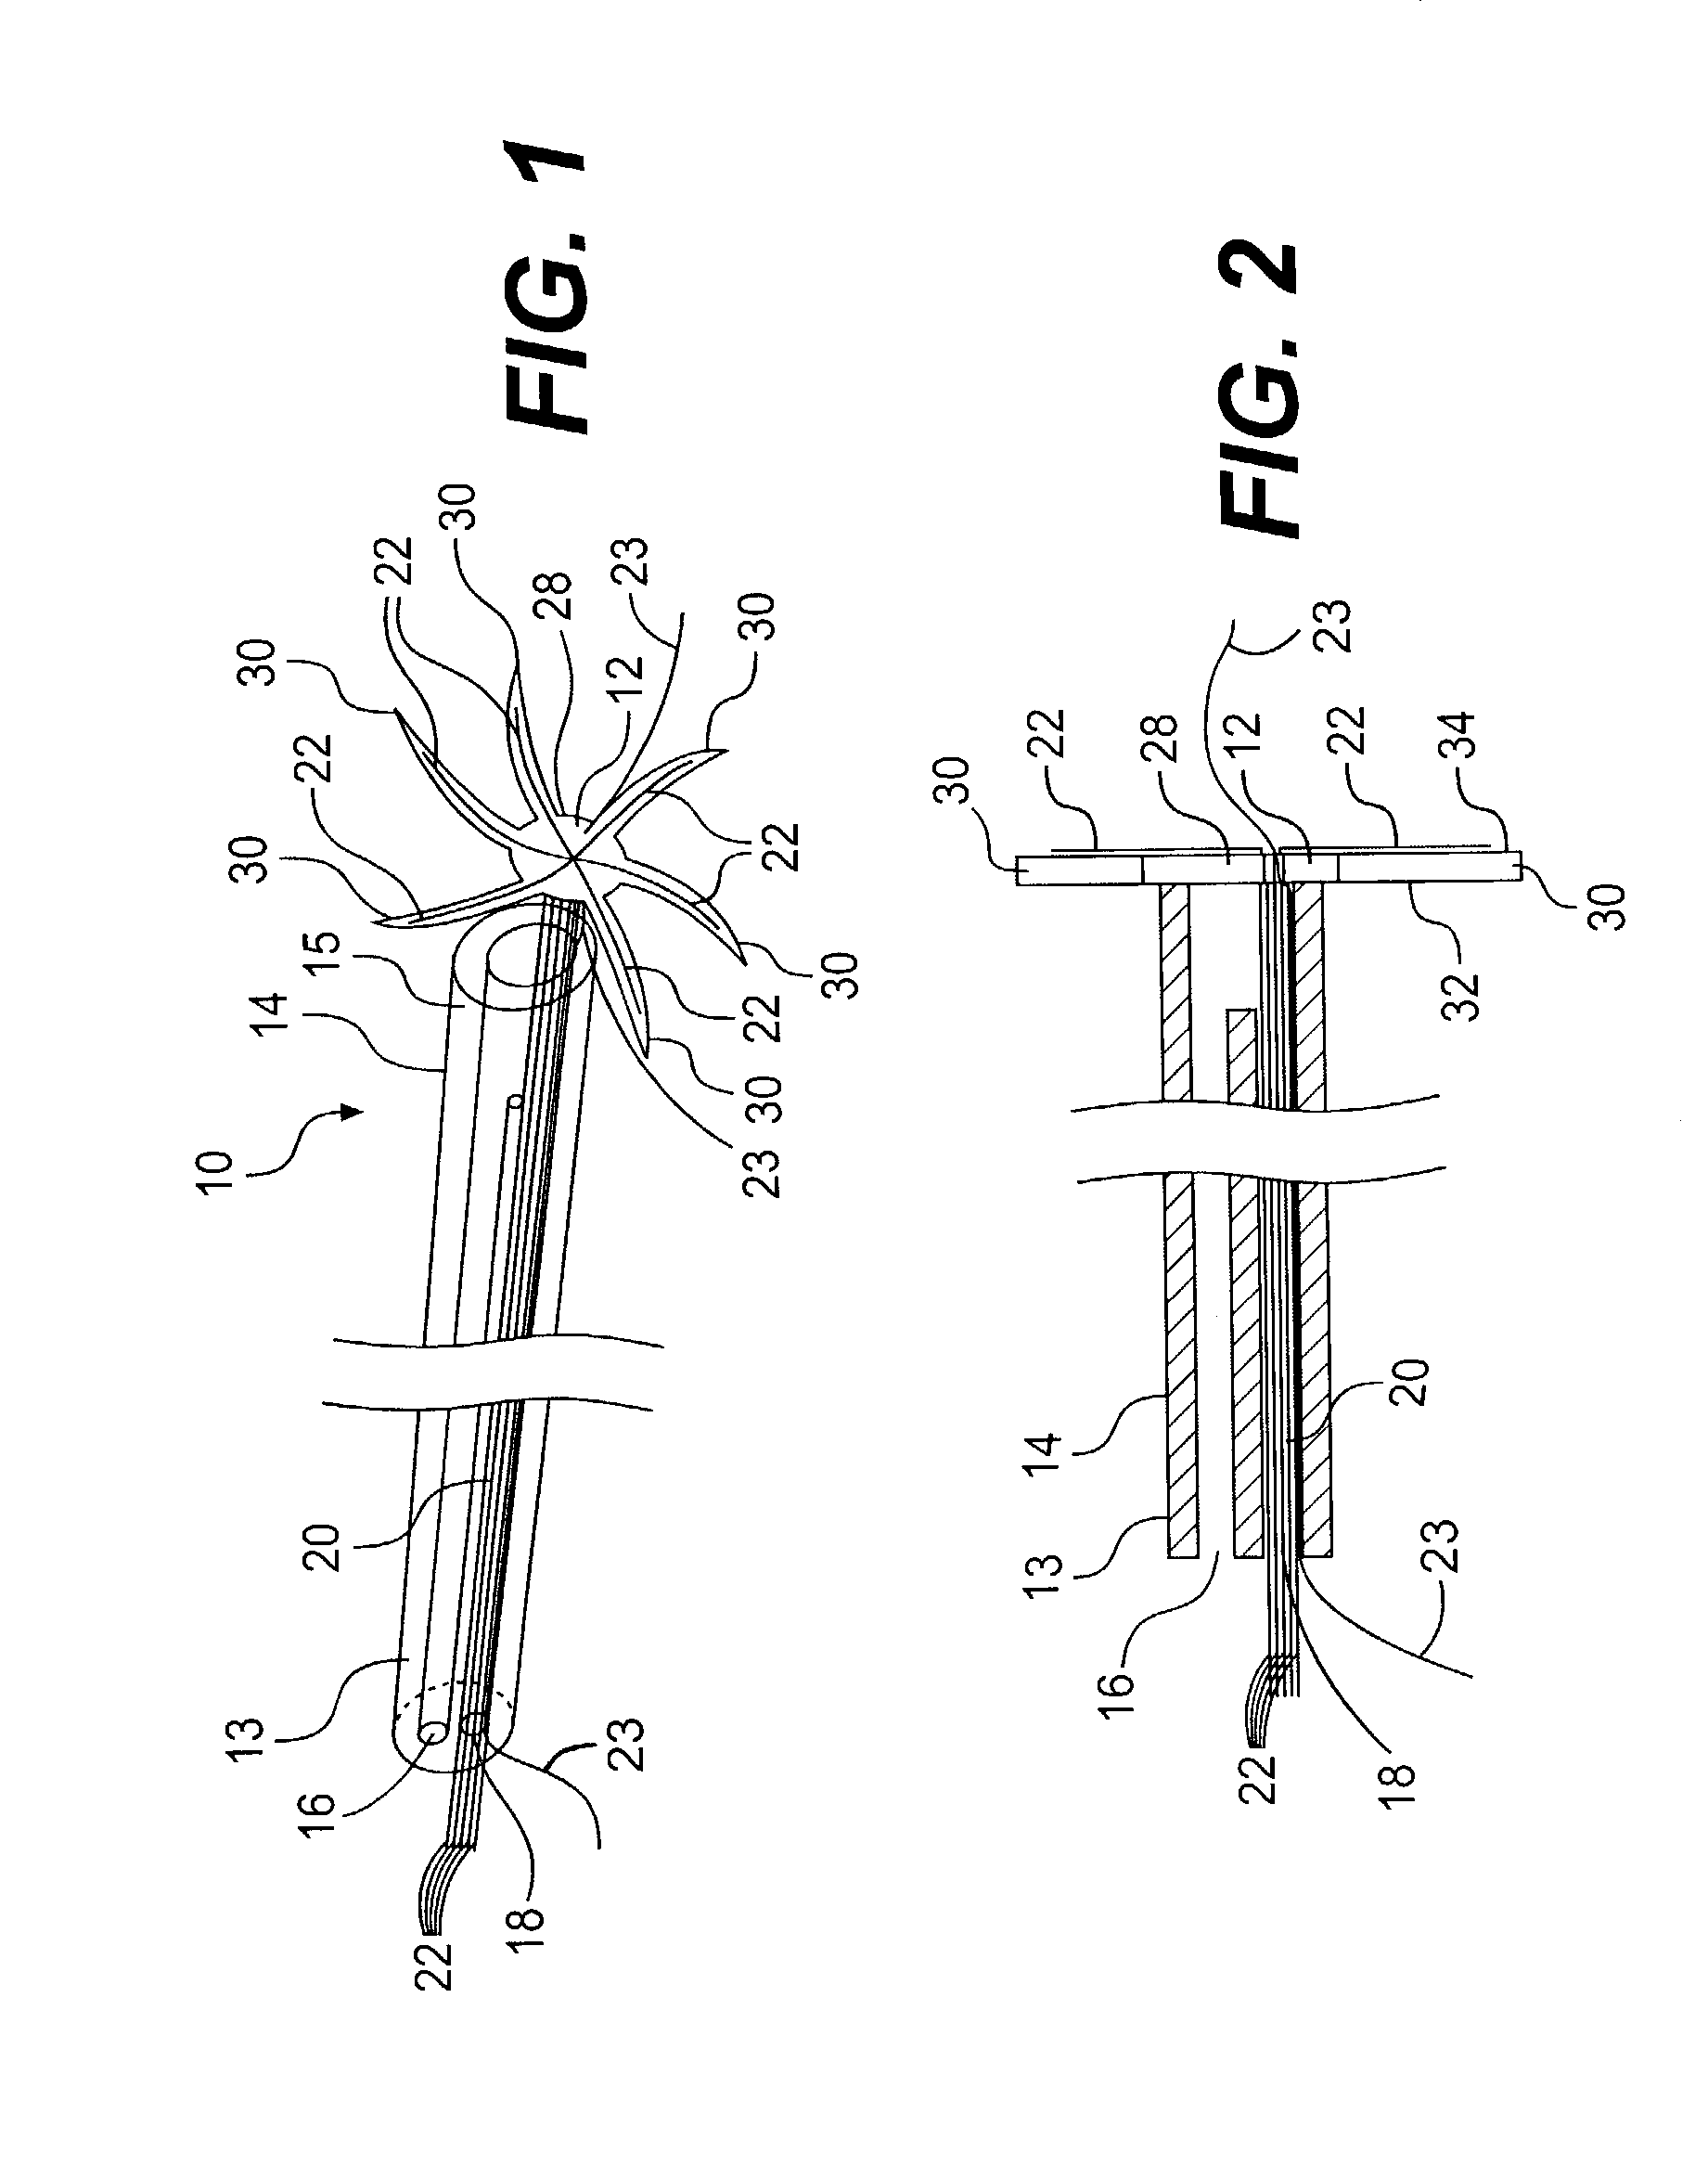 Implantable device for treating atrial fibrillation and method of using same